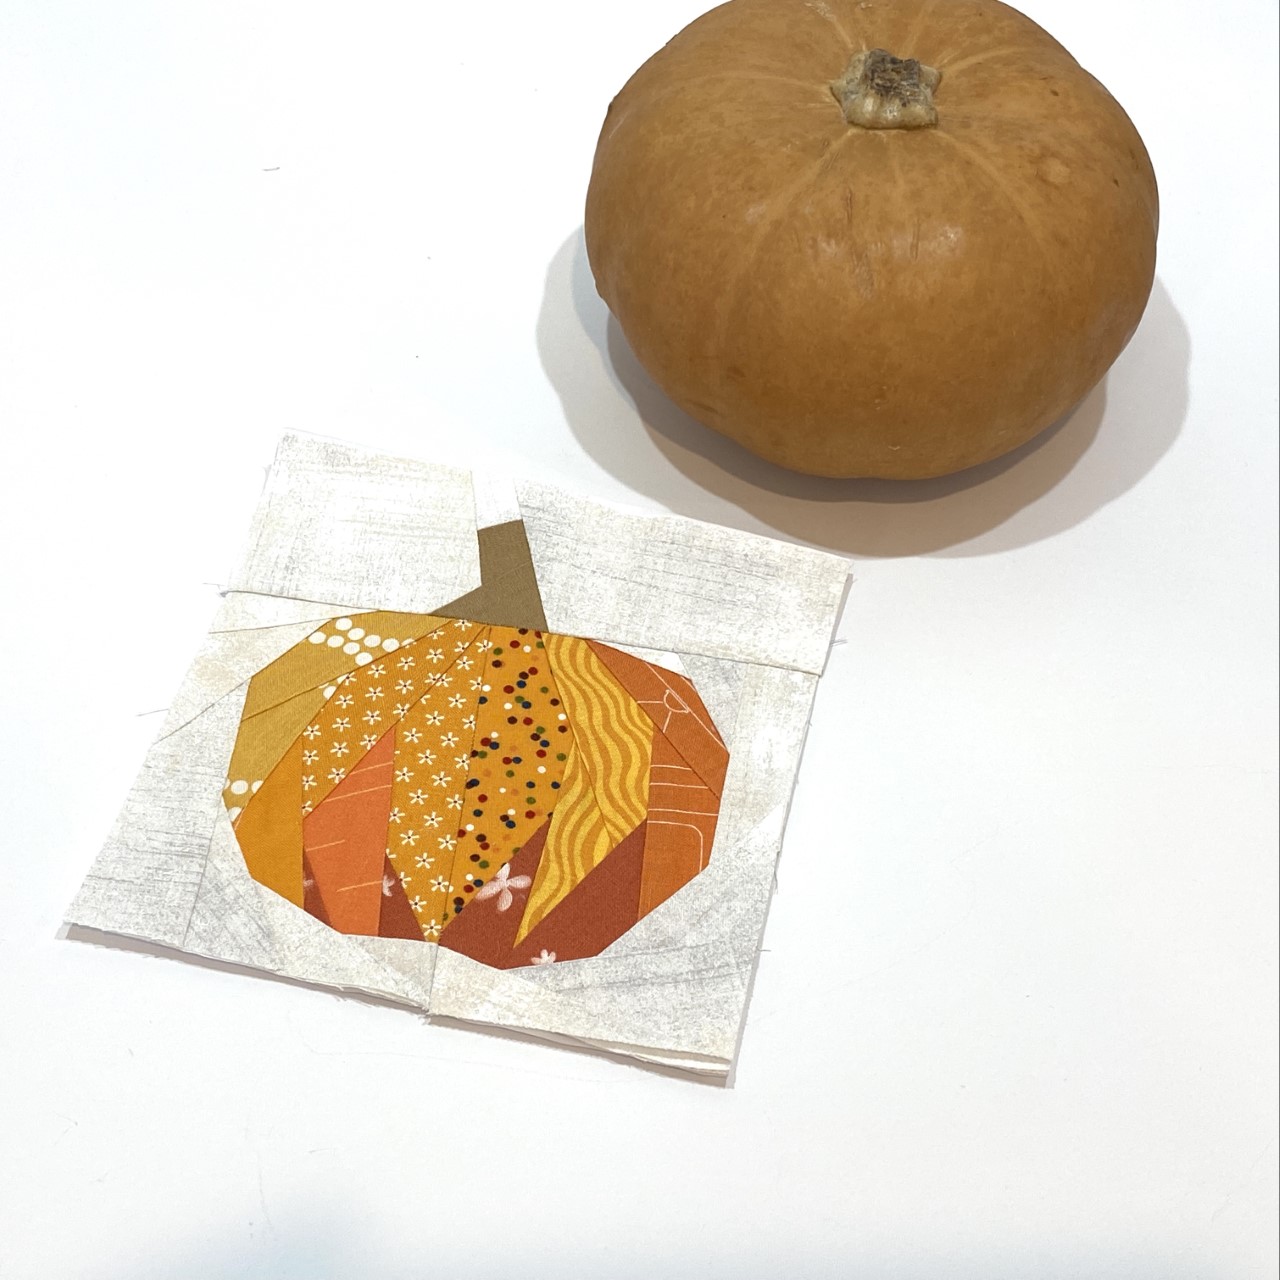 This paper pieced pumpkin quilt block is an example of a pattern that is designed for using up fabric scraps from other quilting projects.